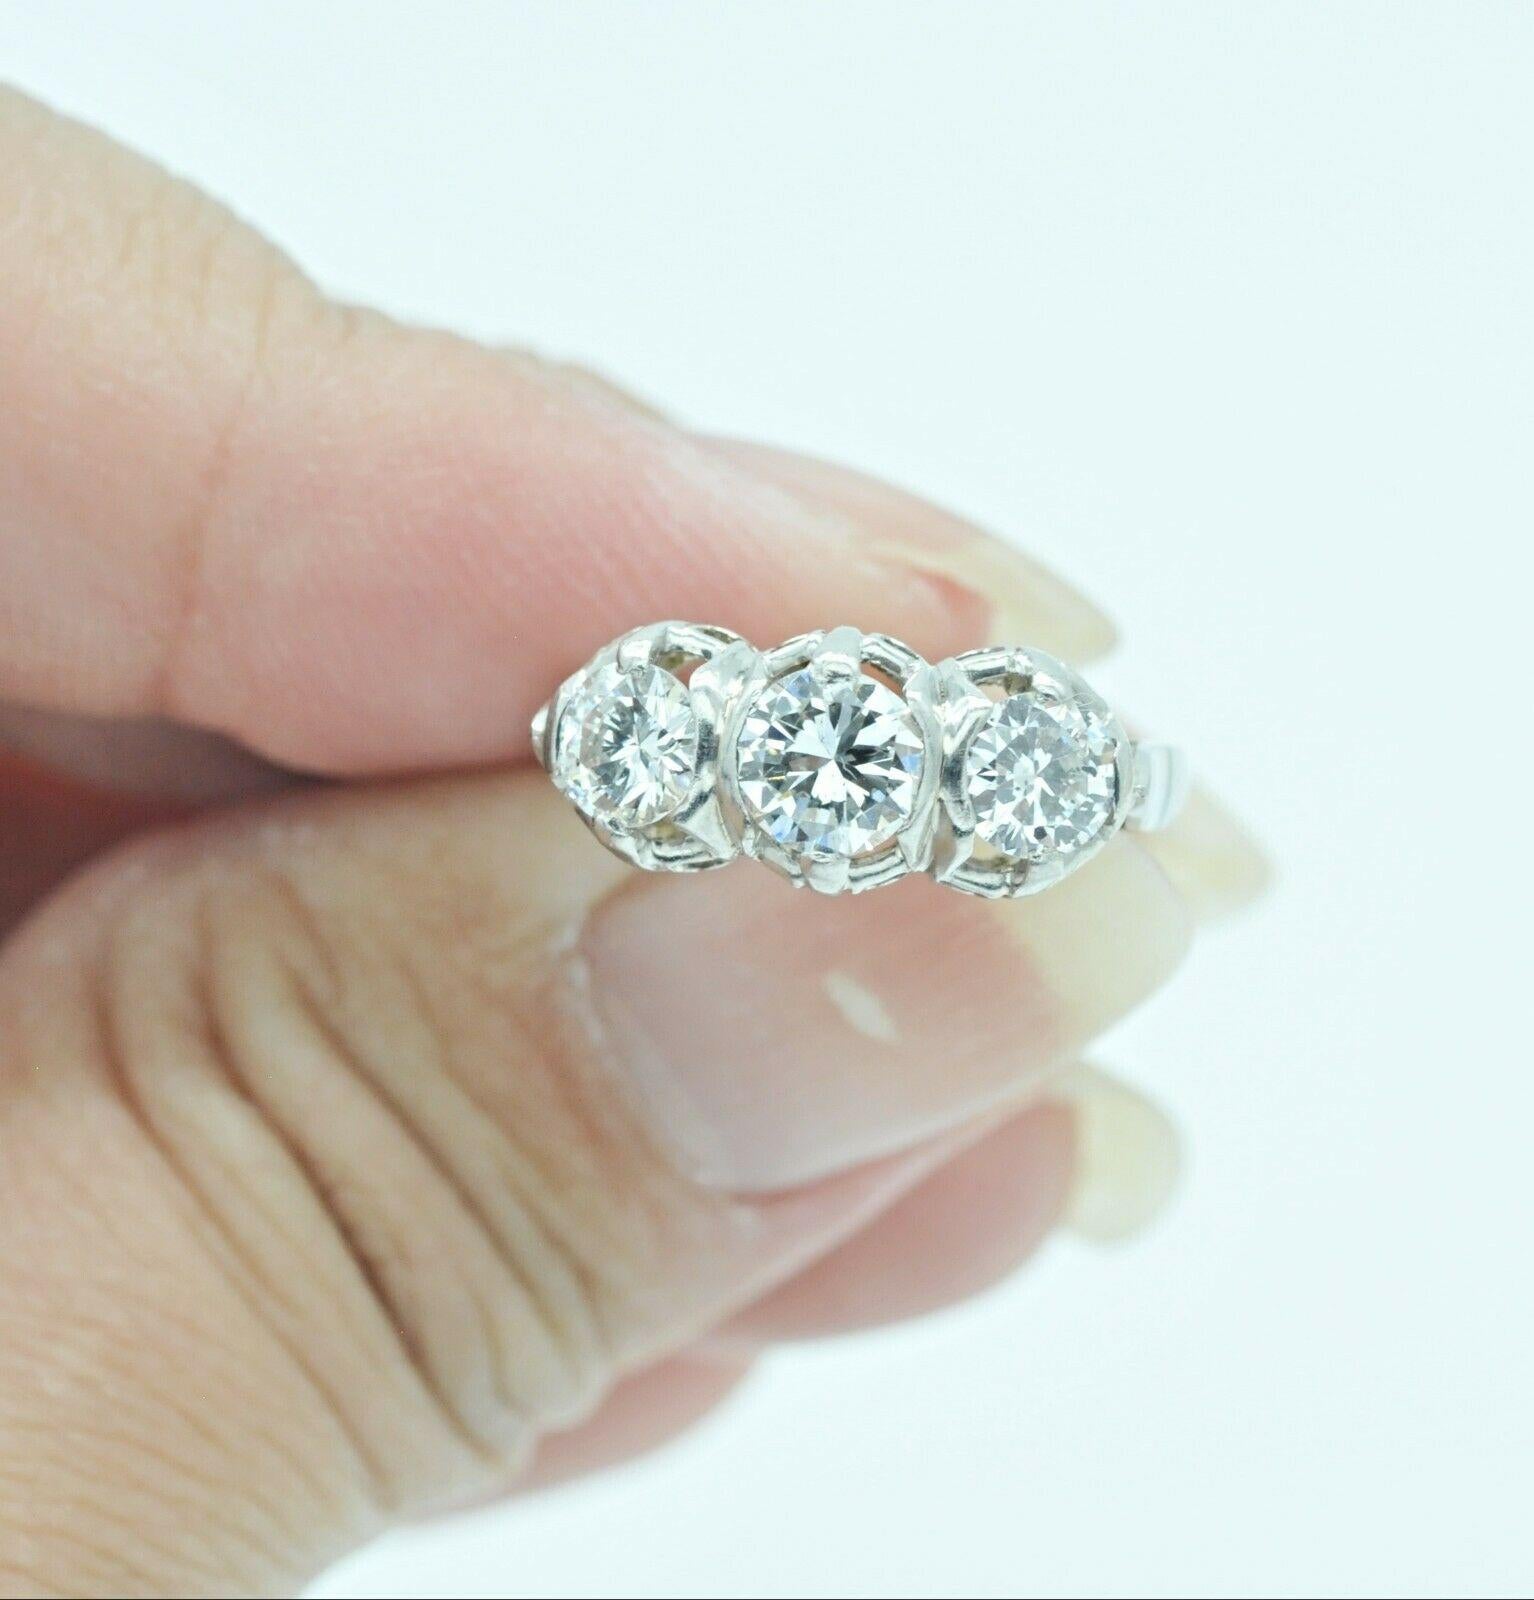 Total Carat Weight:1.02
Diamond Clarity Grade:Slightly Included (SI2)
Setting Style:Three-Stone
Type:Engagement Ring
Metal Purity:14k
Main Stone:Diamond
Metal:White Gold
Brand:Antique
Diamond Color Grade:G
Ring Size:5
Main Stone Shape:Round